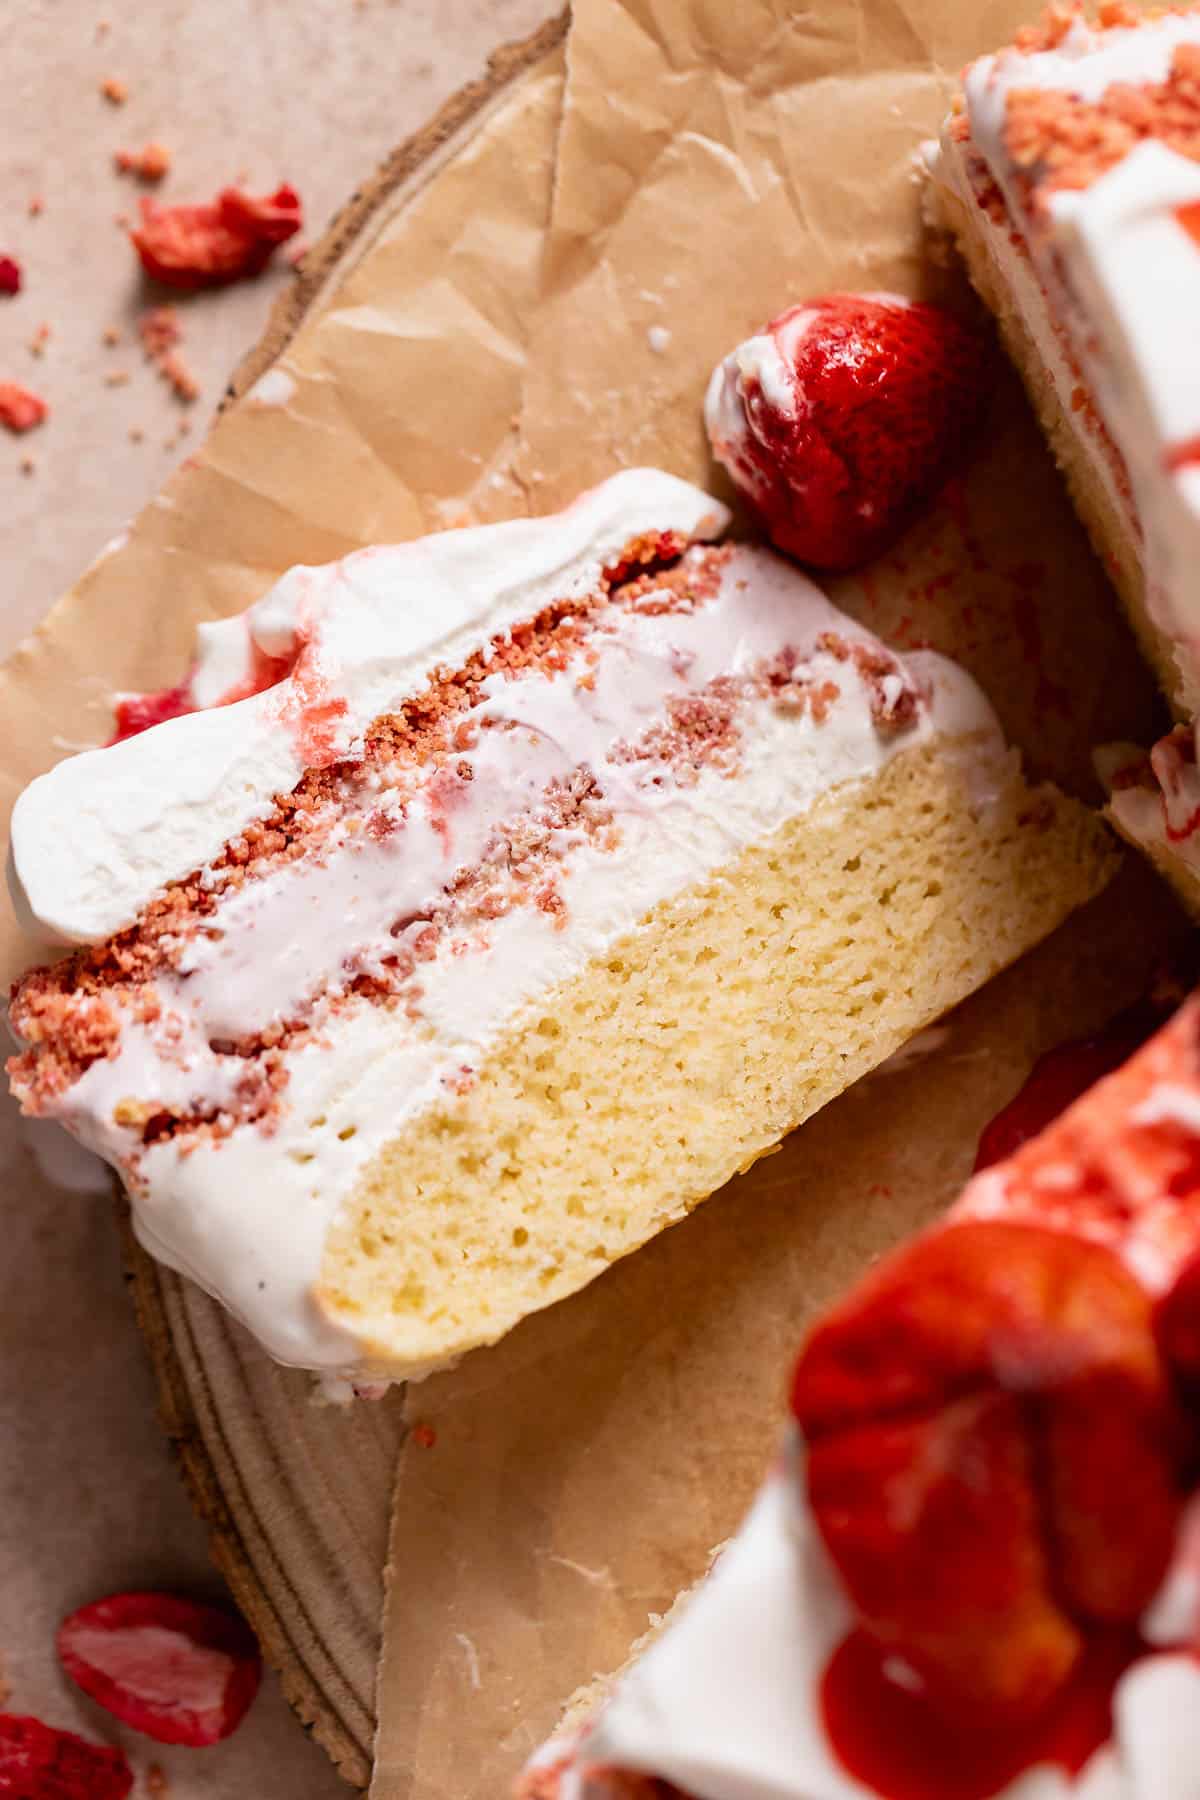 A slice of strawberry ice cream cake on a wooden platter.